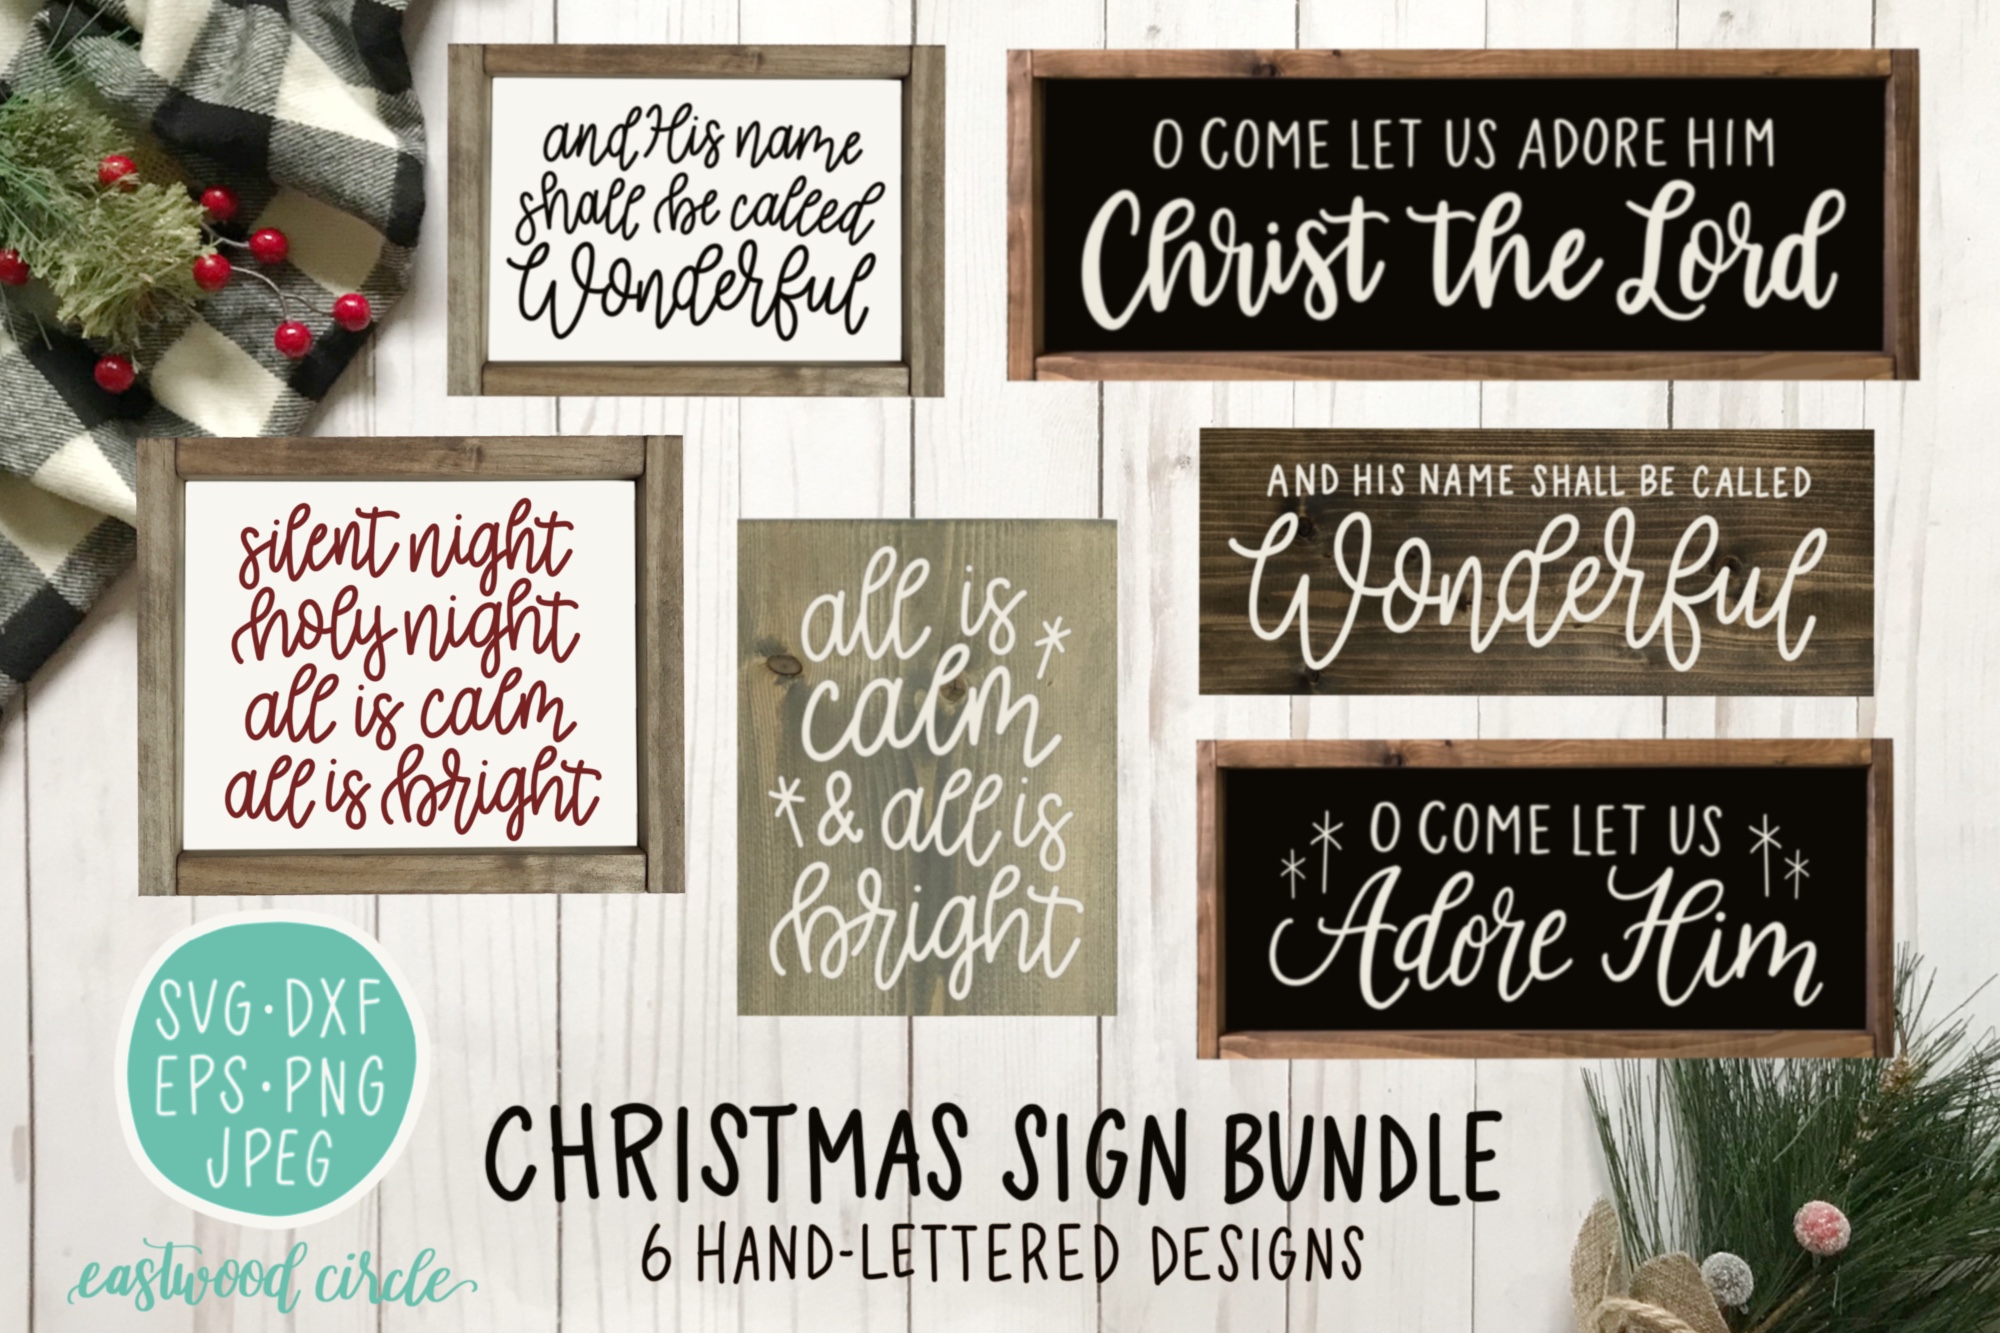 Christmas SVG Bundle - Hand Lettered Cut Files for Signs